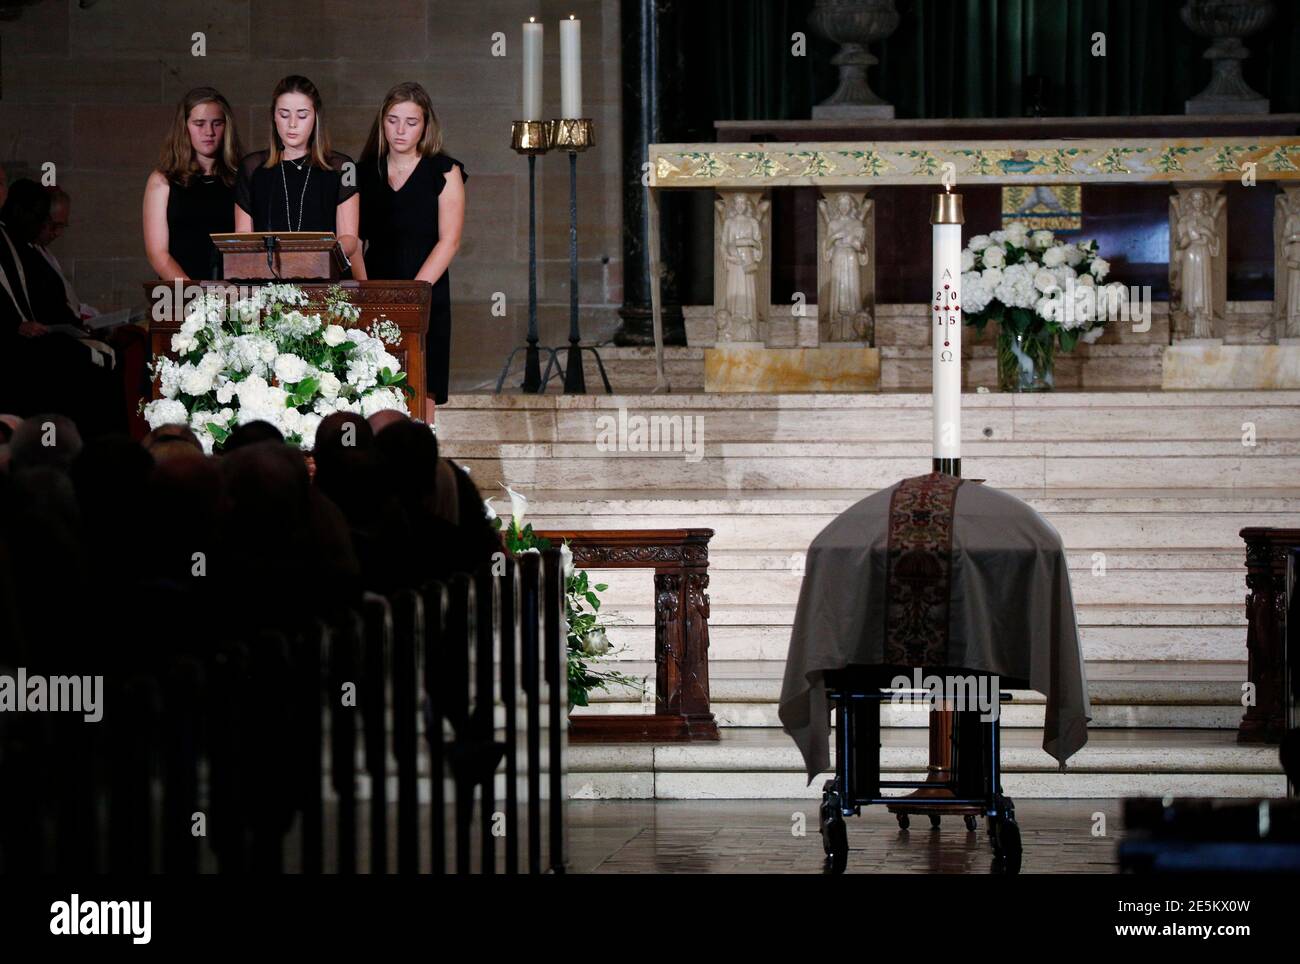 Vice President Joe Biden's grandaughters Naomi, Maisy and Finnegan Biden participate in a reading during their uncle Beau Biden's funeral in Wilmington, Delaware in St. Anthony of Padua church in Wilmington, Delaware June 6, 2015.  REUTERS/Kevin Lamarque Stock Photo